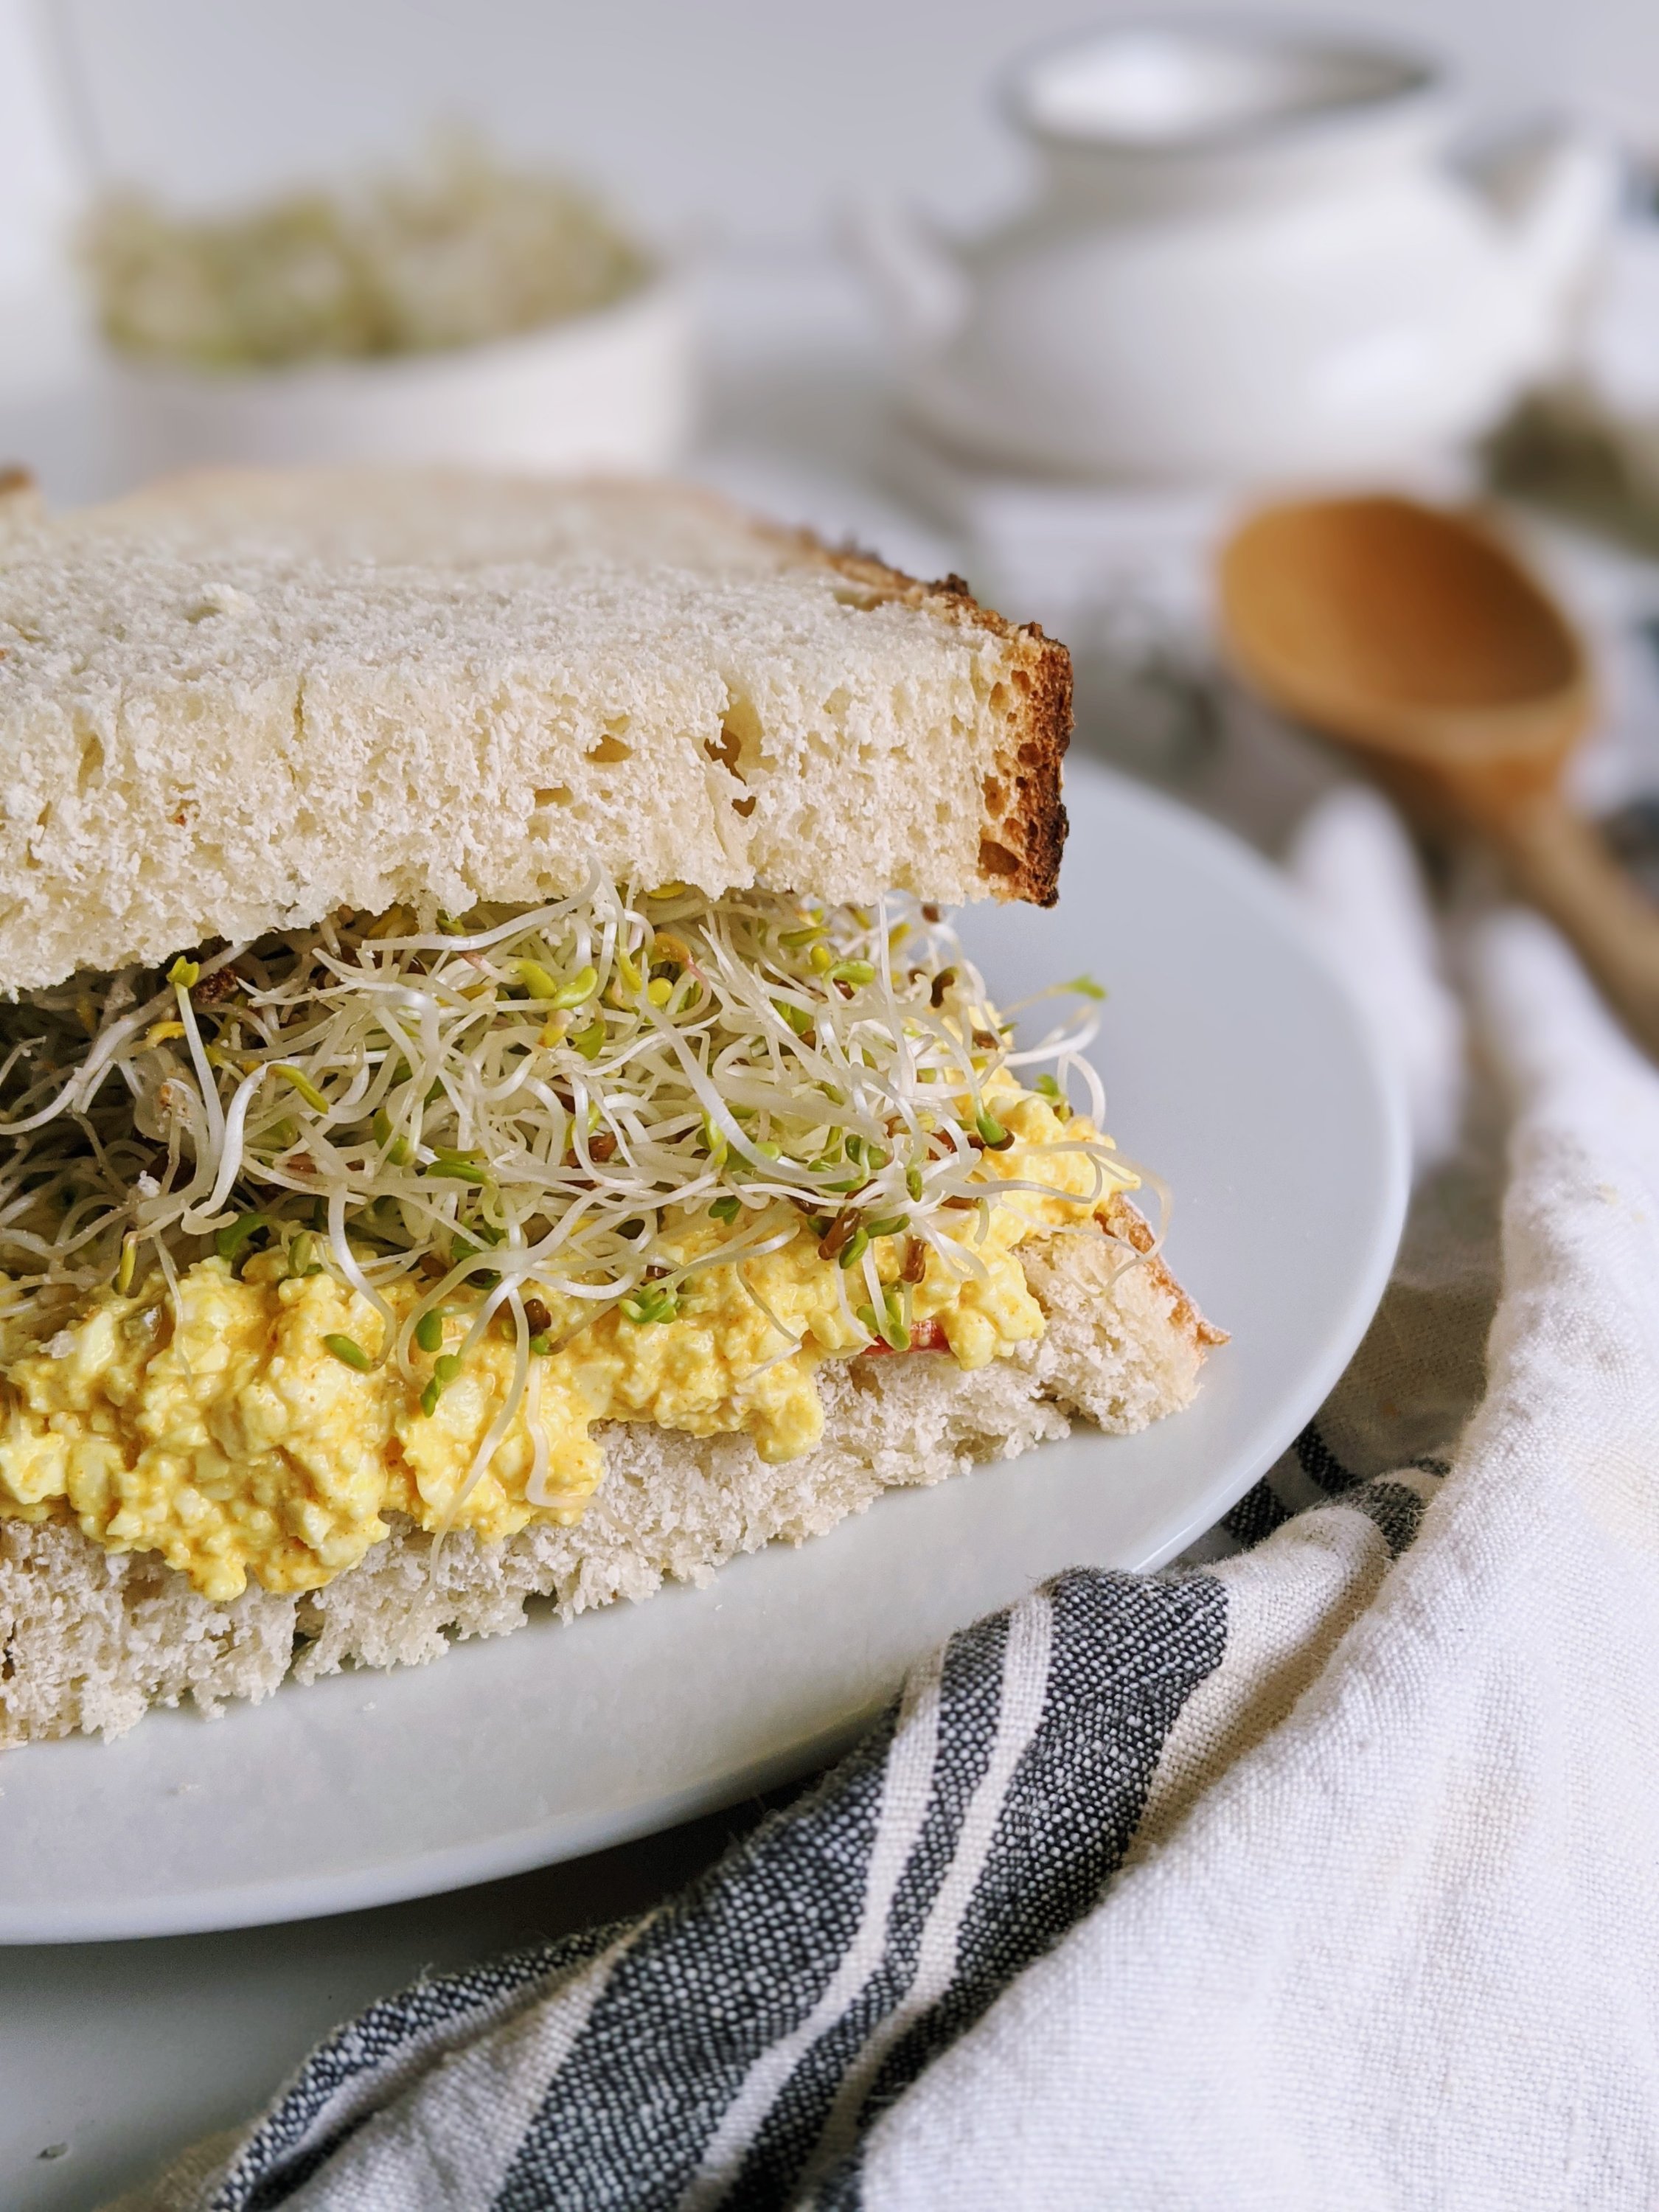 vegan egg salad sandwich with turmeric curcumin healthy recipes that use dried turmeric root vegan gluten free vegetarian protein from plants plant based